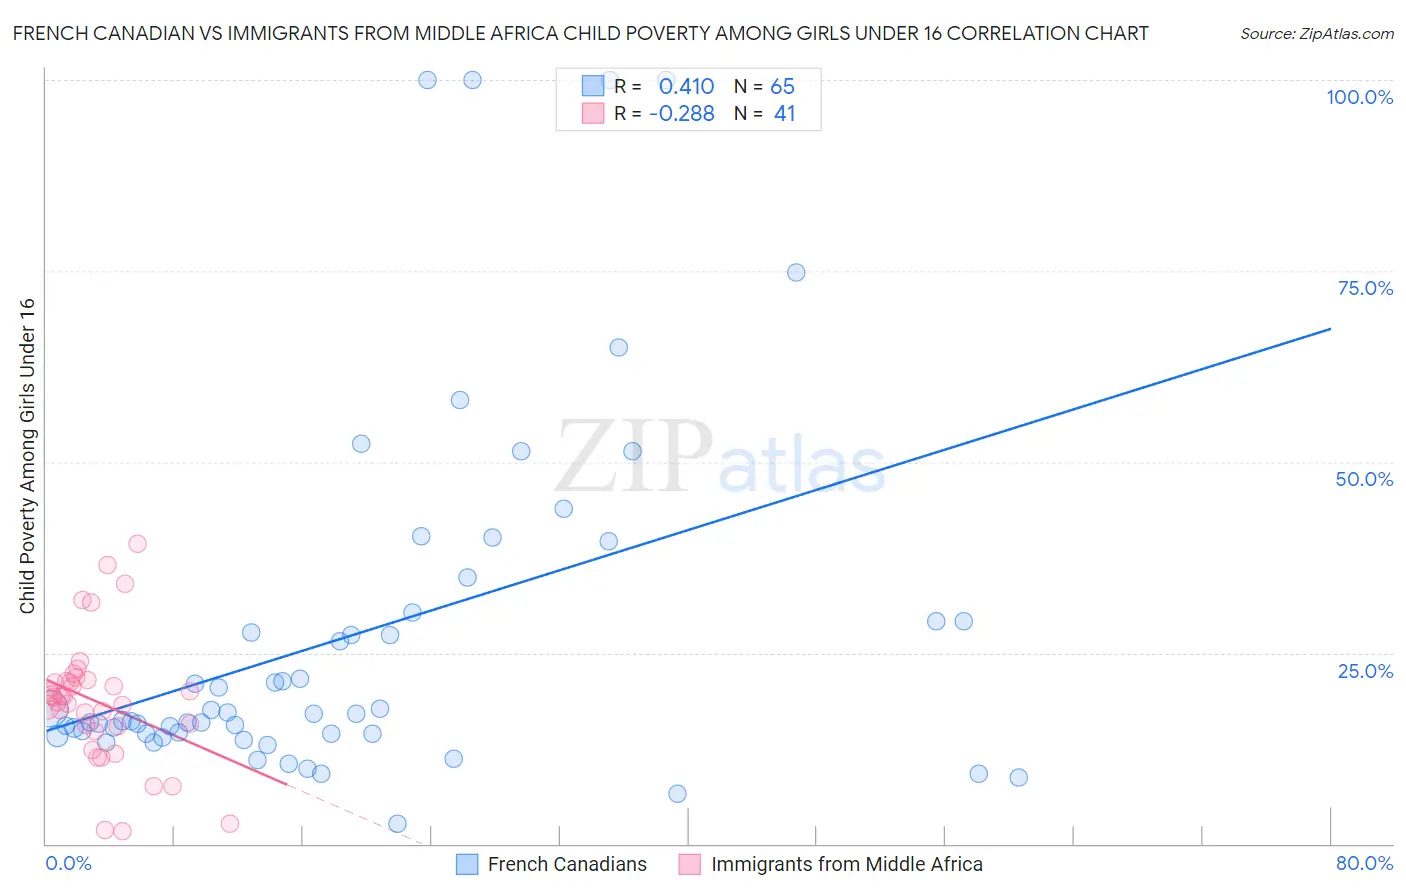 French Canadian vs Immigrants from Middle Africa Child Poverty Among Girls Under 16